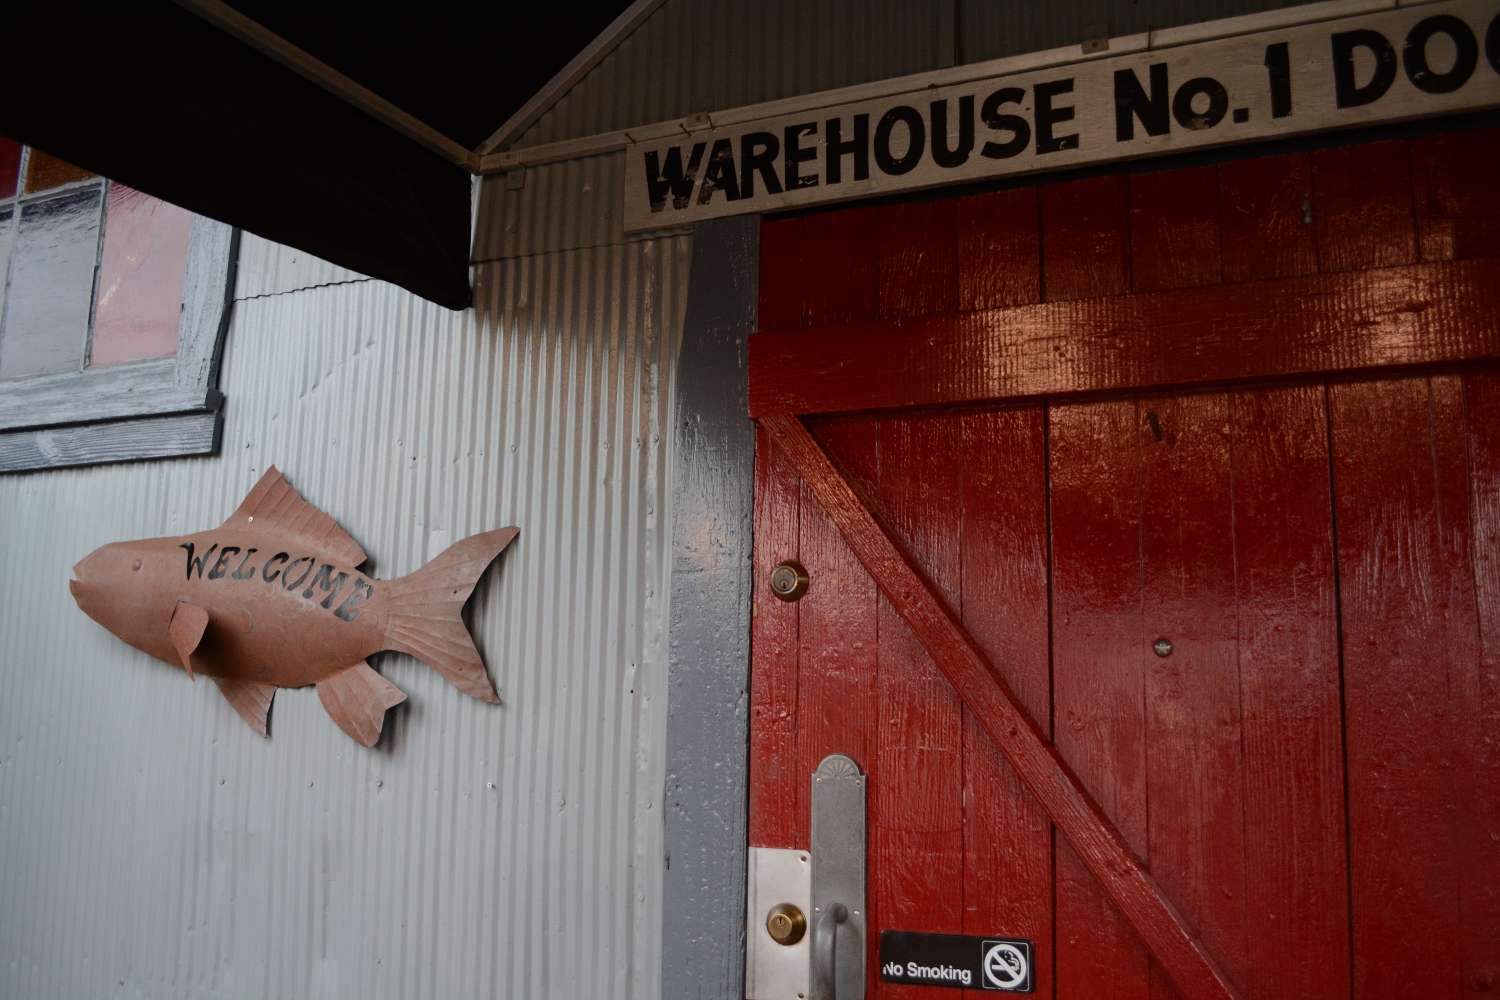 Welcome to Warehouse No. 1, the host for the 2015 Old Milwaukee B.A.S.S. Nation Championship registration. The faÃ§ade is rustic, but this old warehouse is actually a very nice restaurant on the Ouachita River, the fishery that will have all 59 anglers on it when the competition starts on Thursday.